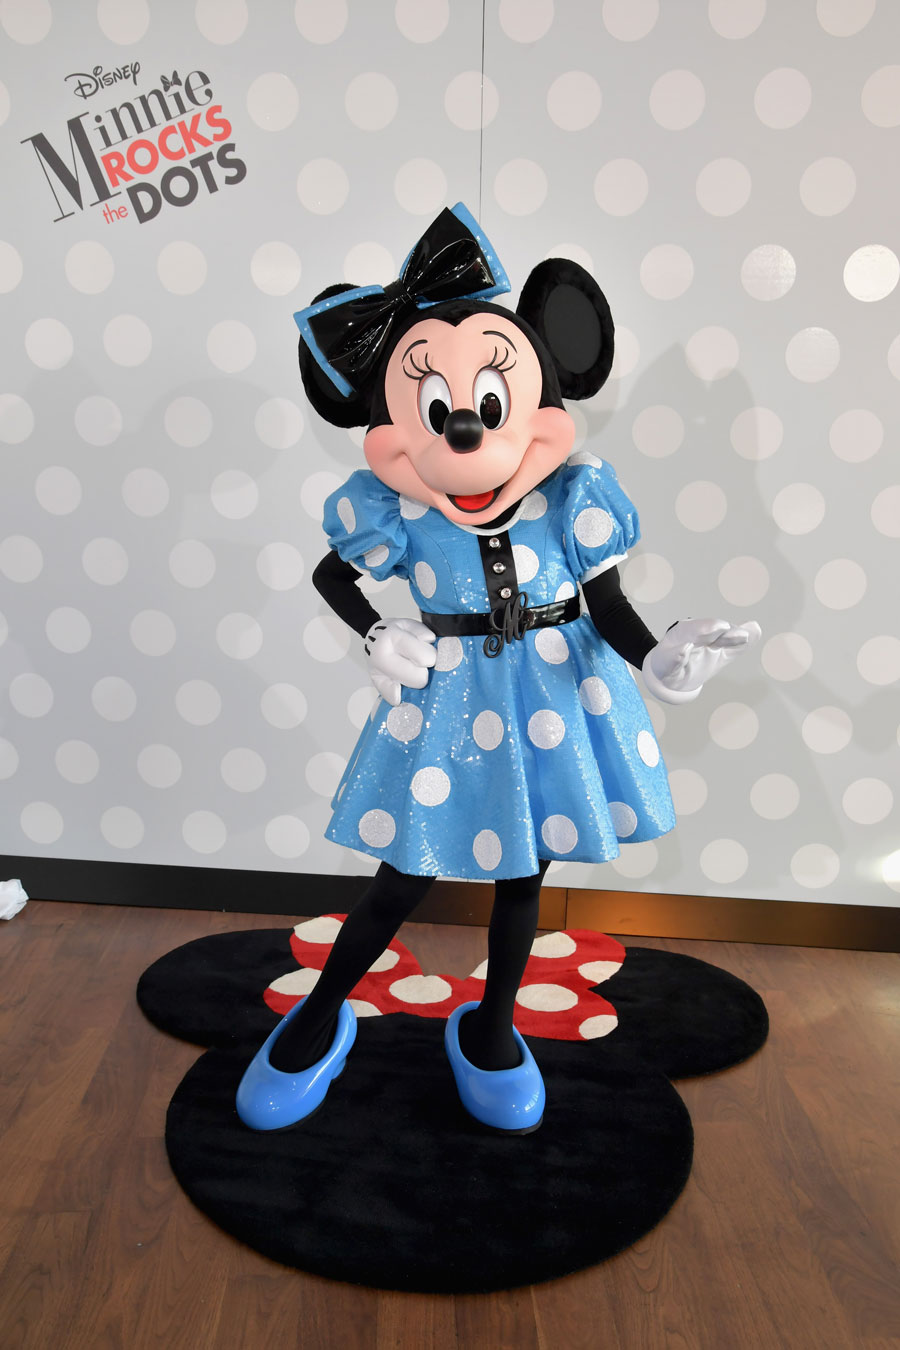 #RockTheDots at Disney Springs on Sunday, January 22 for Special Offers and Discounts